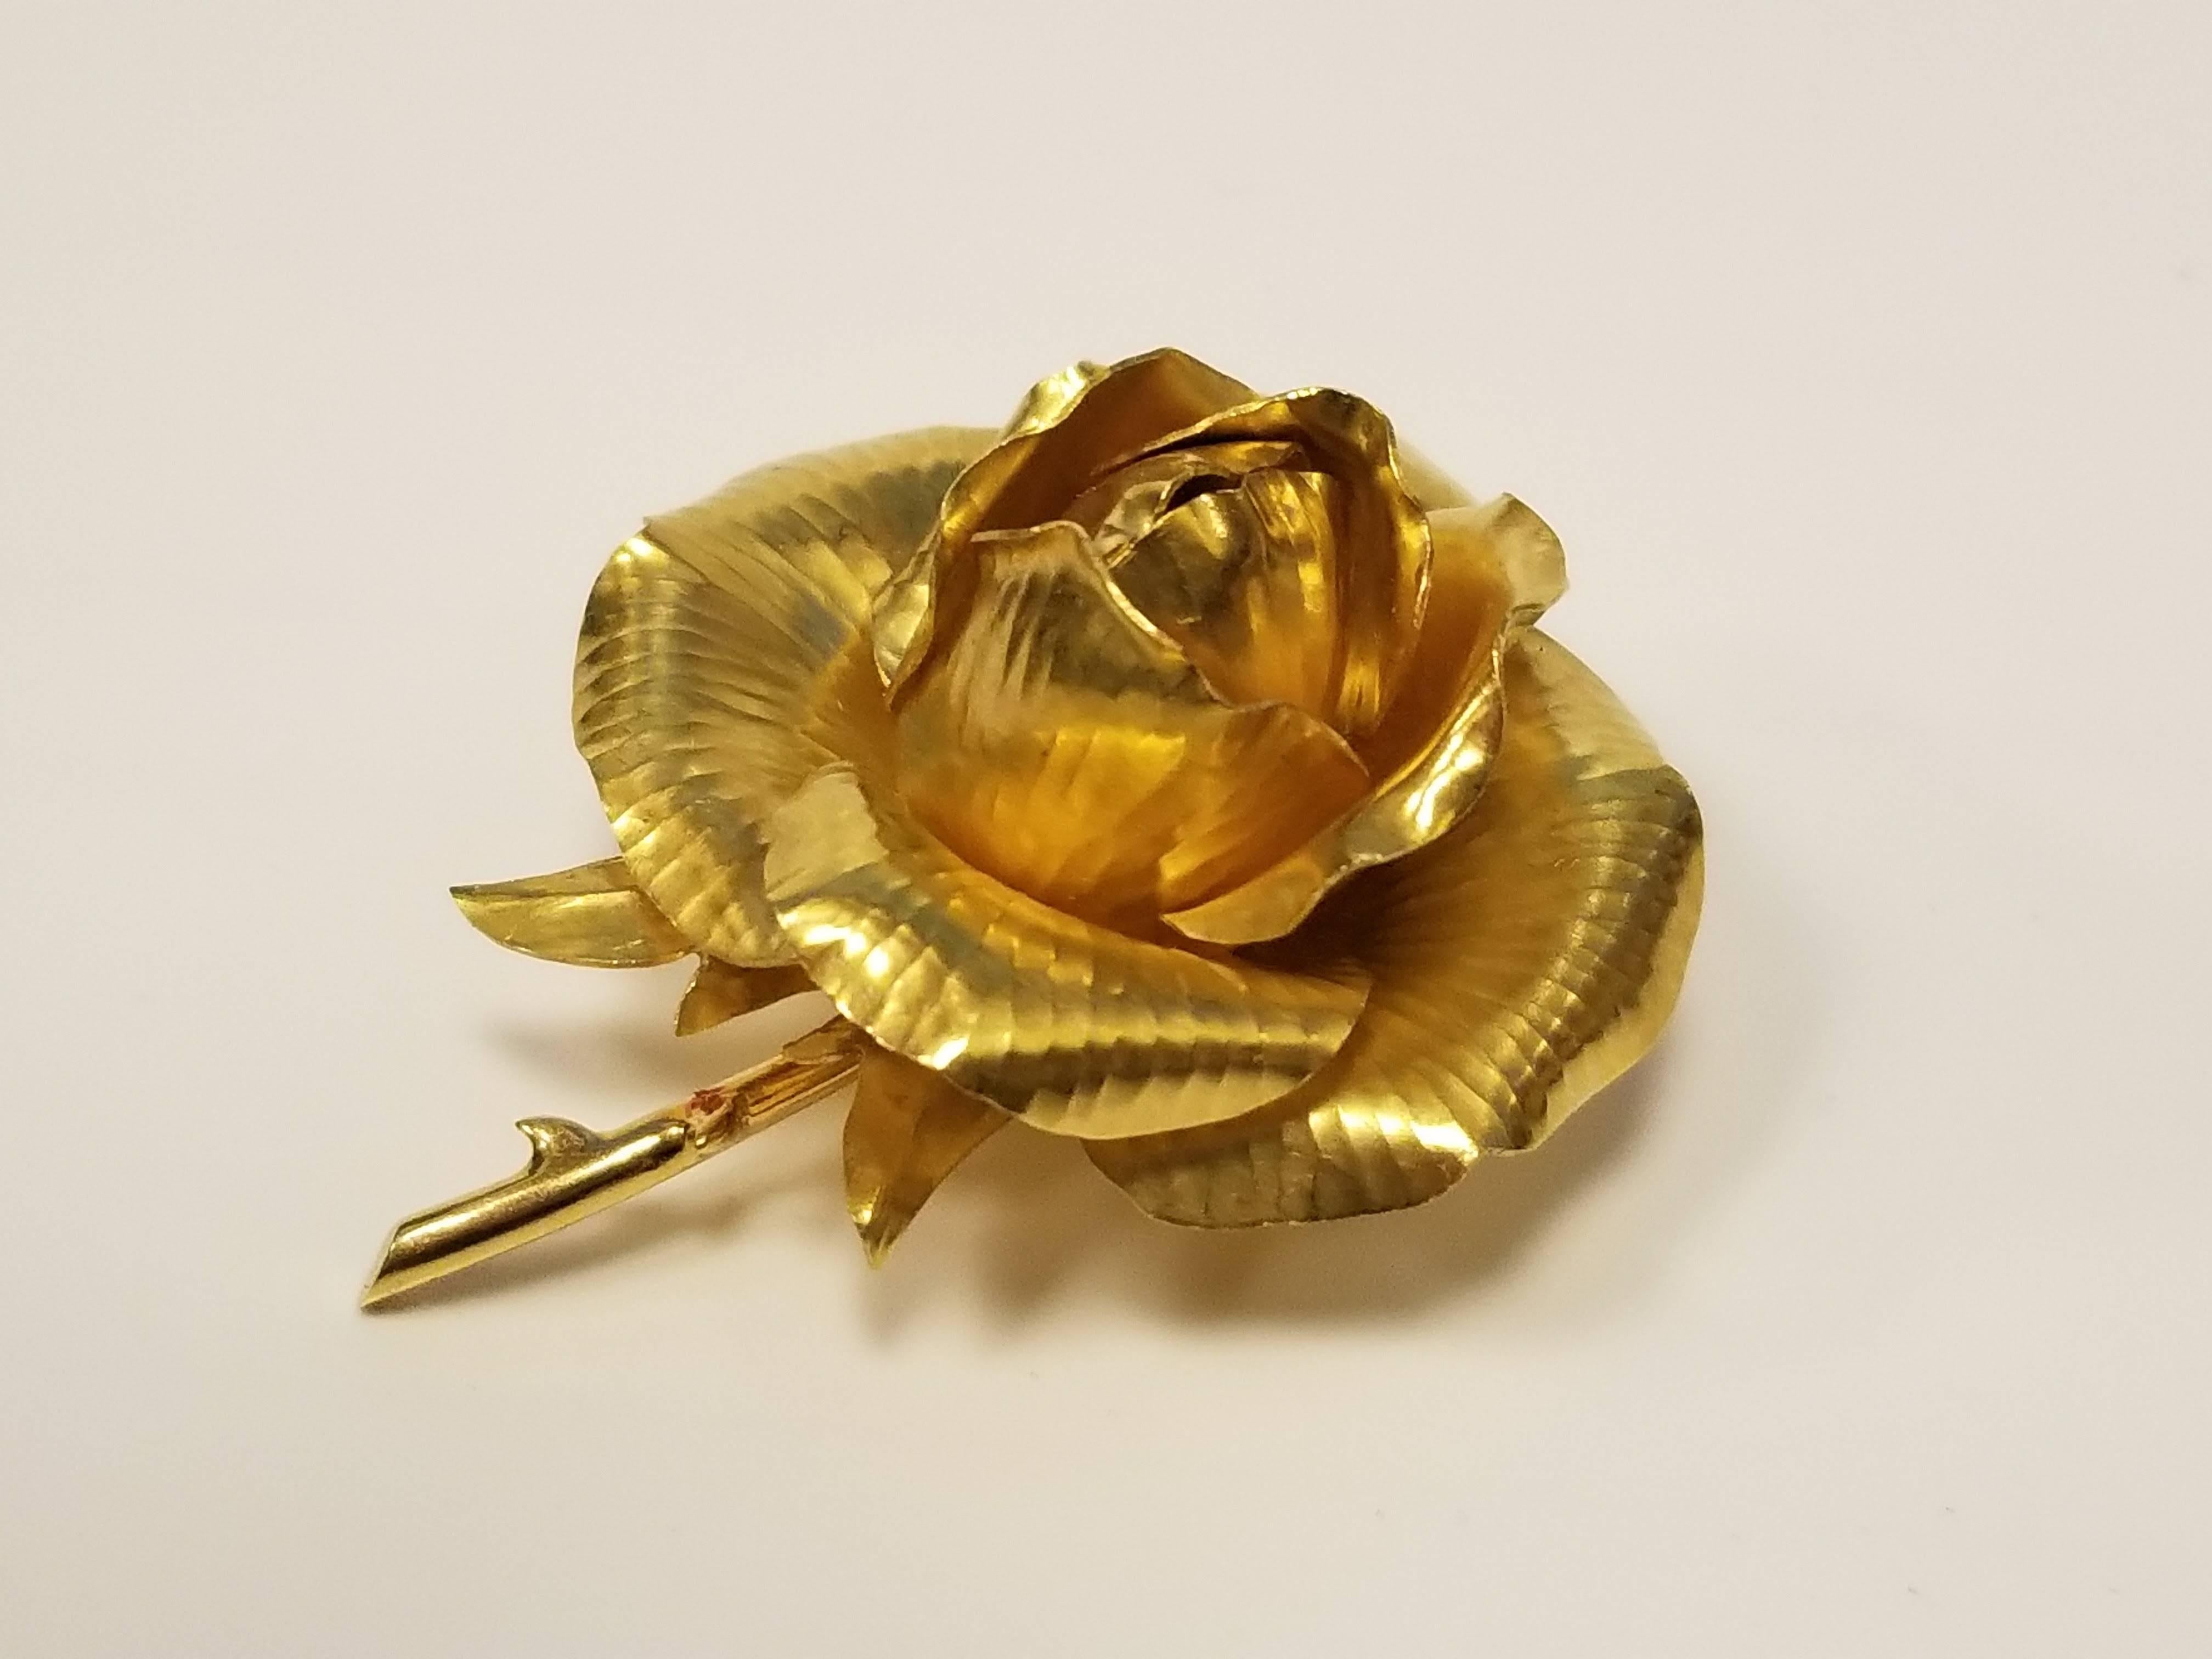 A French Mid-20th Century 18 karat gold brooch by Hermes. The dimensional, textured gold brooch is designed in a bloomed rose motif. Circa 1960's.

Signed, 